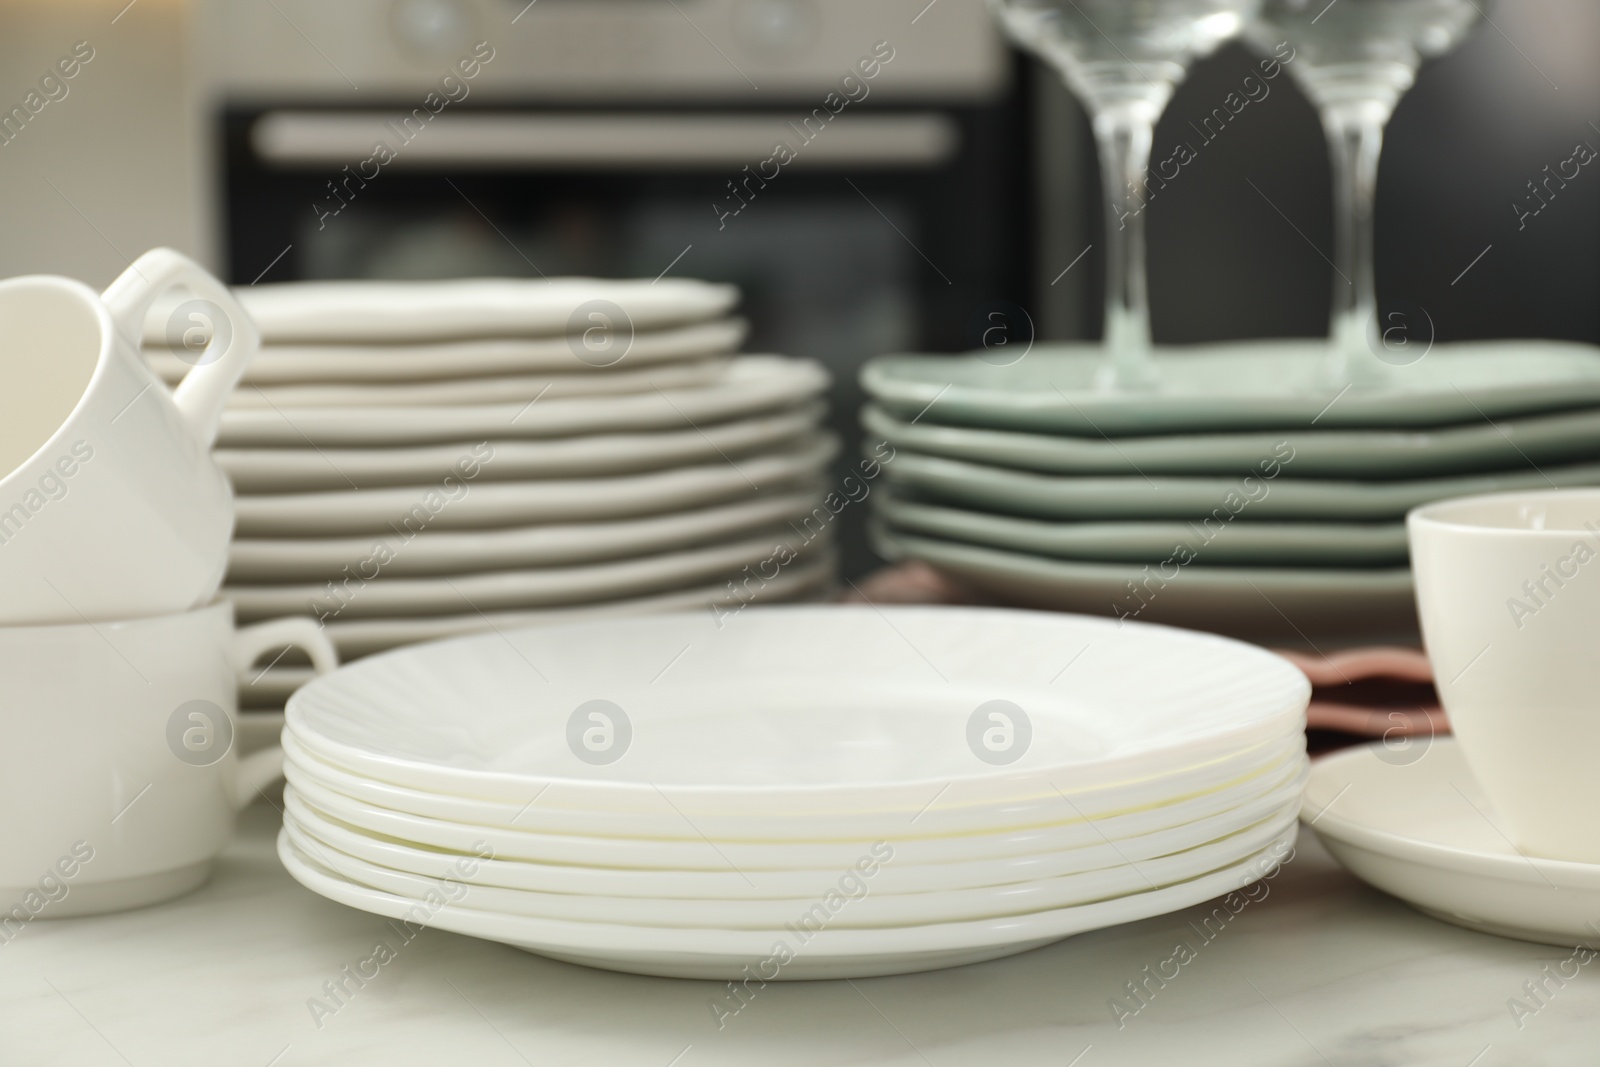 Photo of Clean plates and cups on white marble table in kitchen